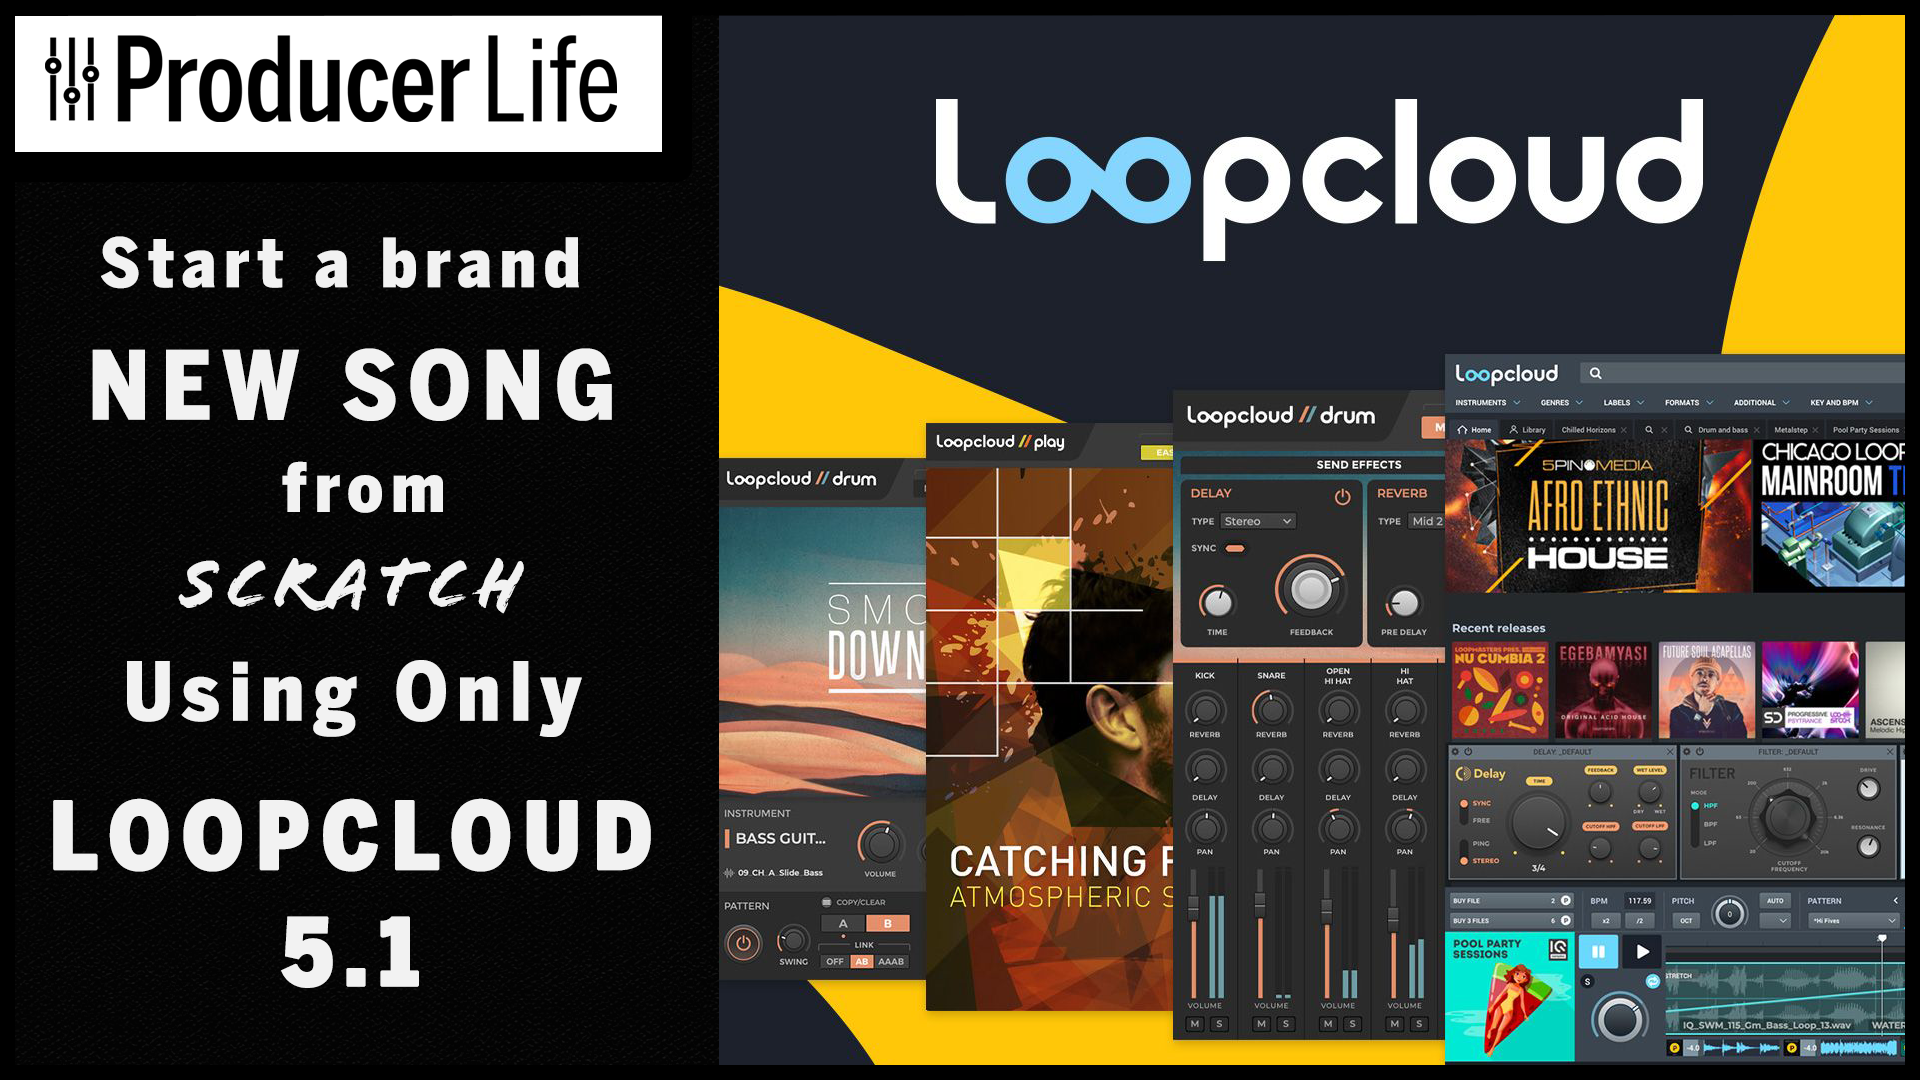 Loopcloud 6.1+ Has Cool New Features October 10, 2021 Tools & Other https://producerlife.co.uk/loopcloud/